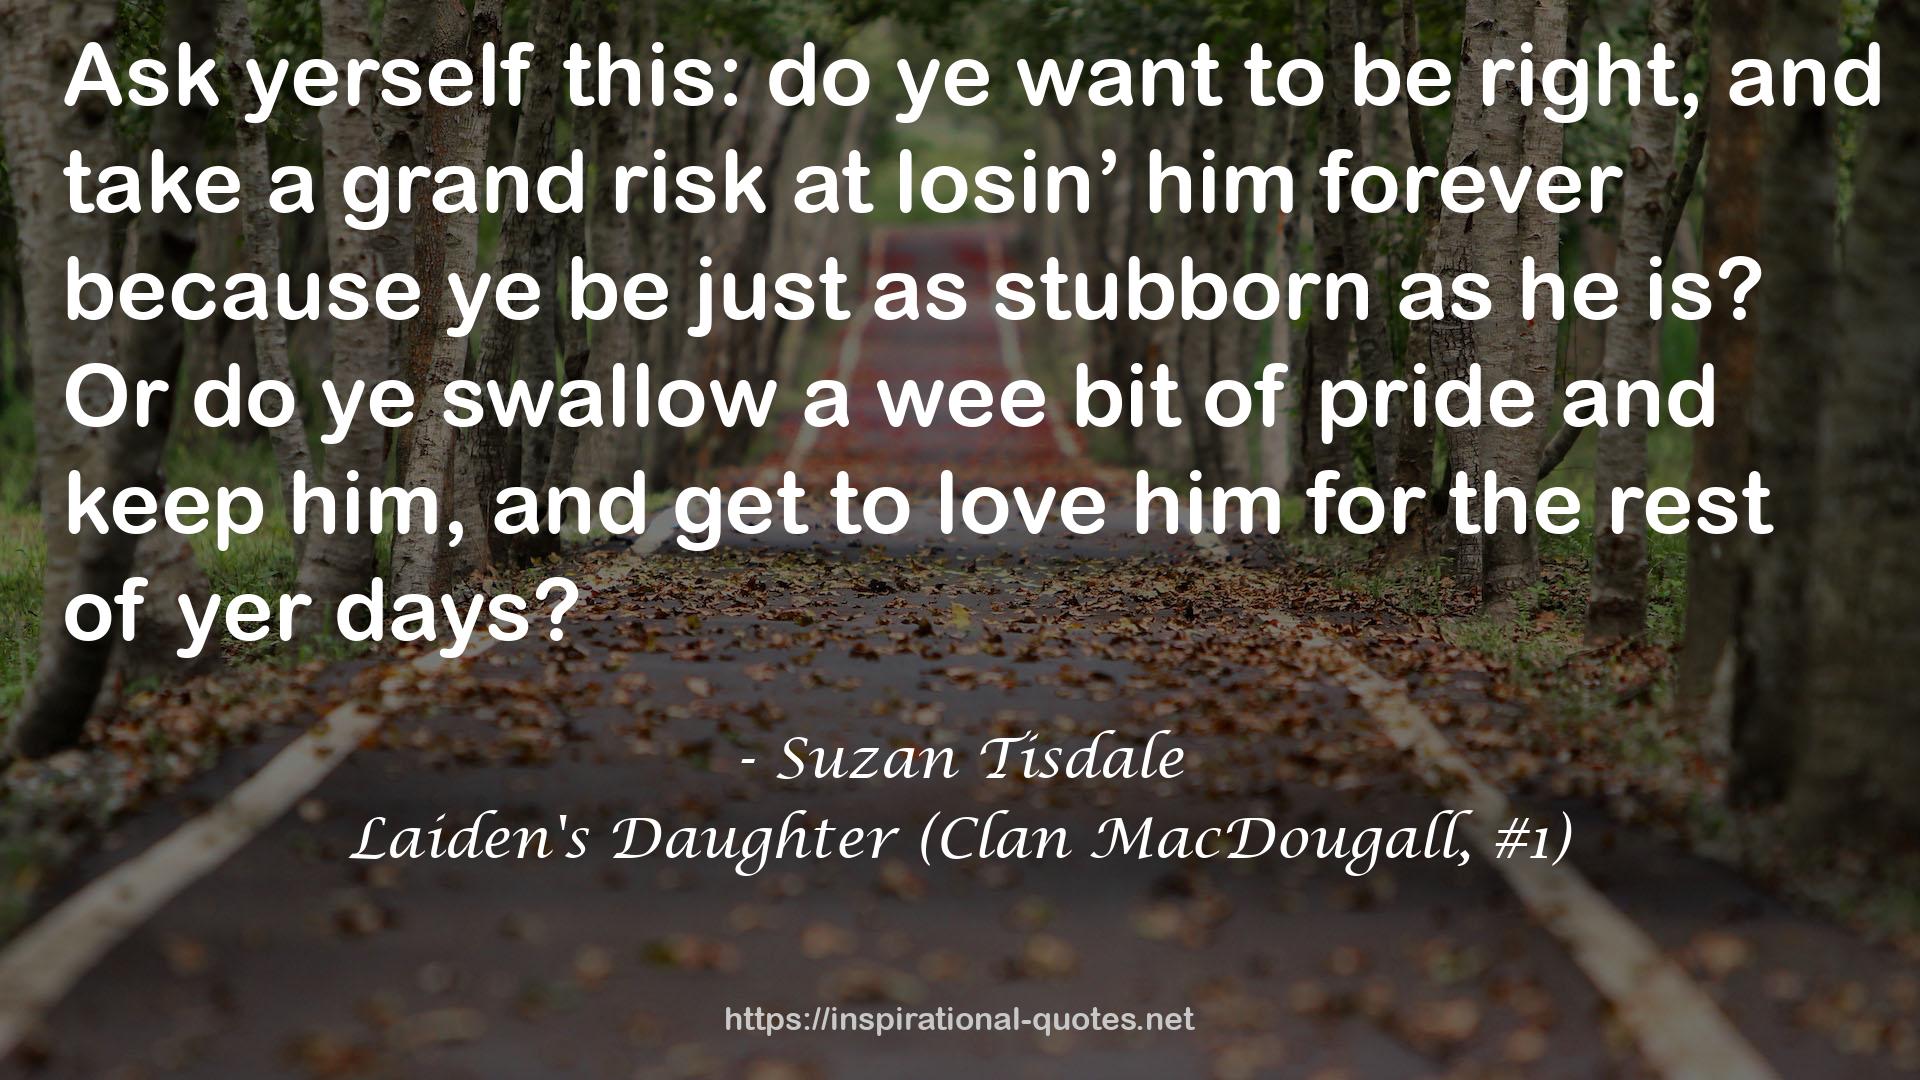 Laiden's Daughter (Clan MacDougall, #1) QUOTES